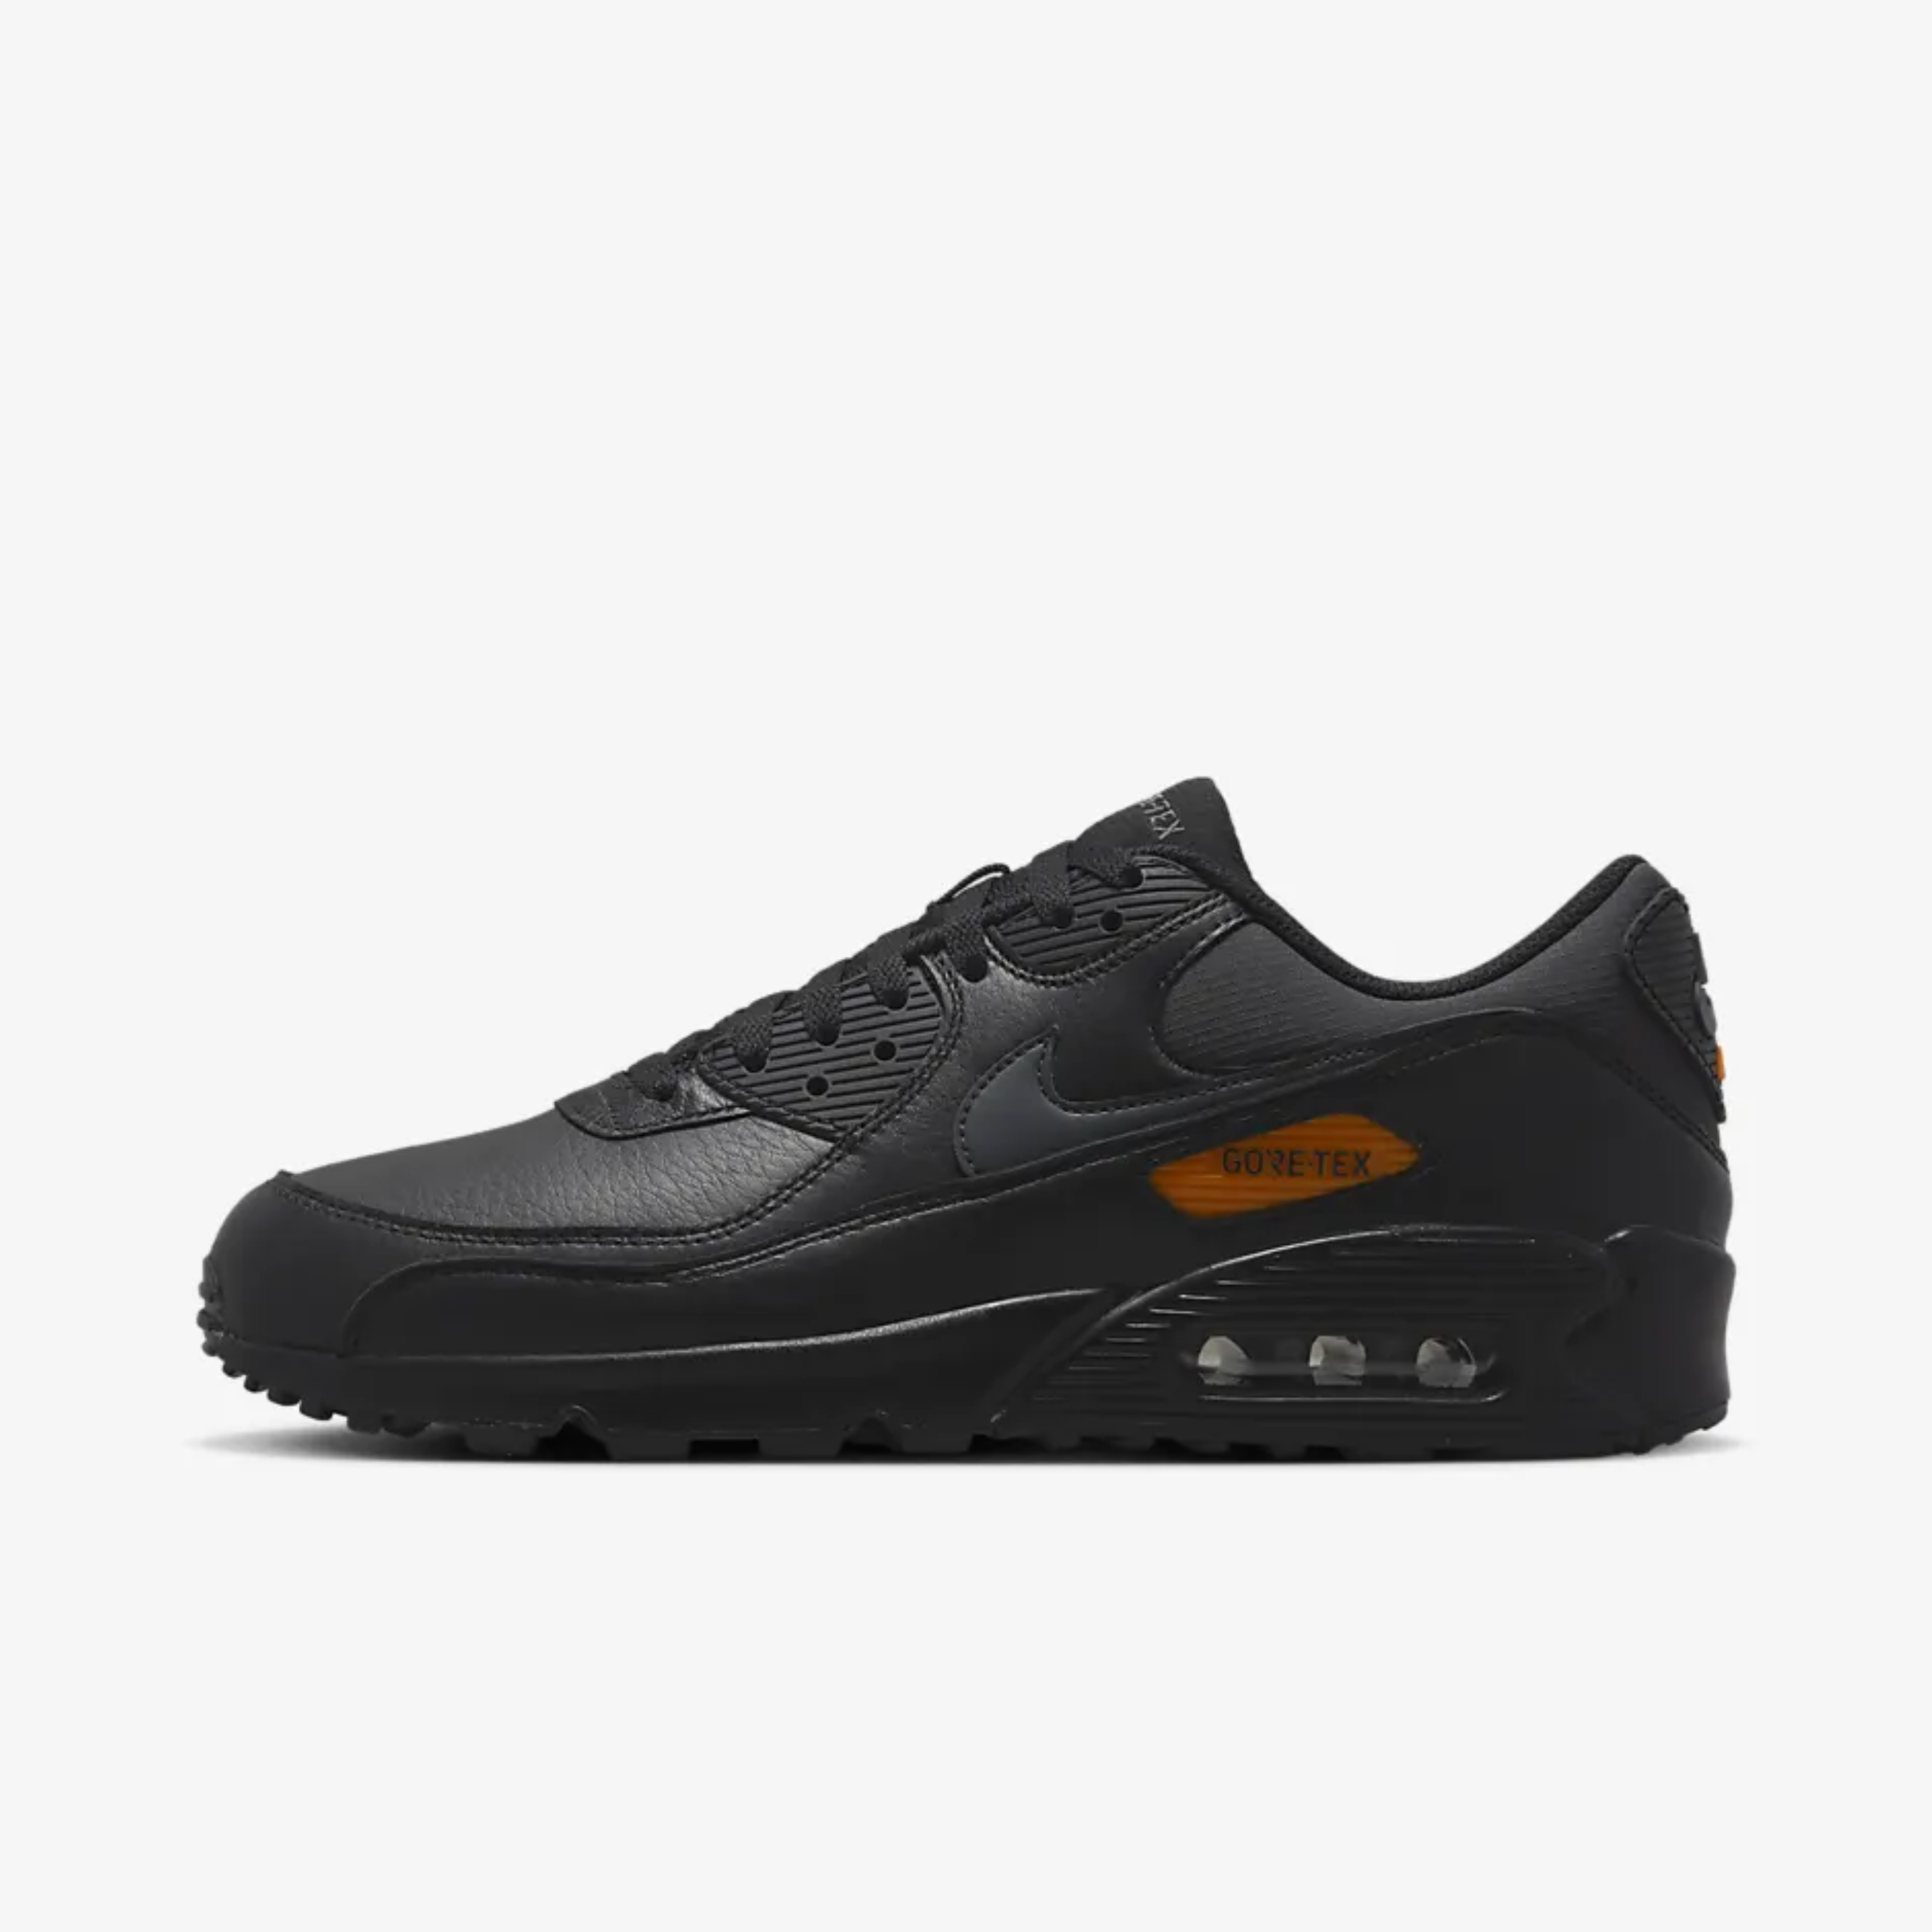 Stay Dry and Stylish with the Nike Air Max 90 GTX - the Perfect